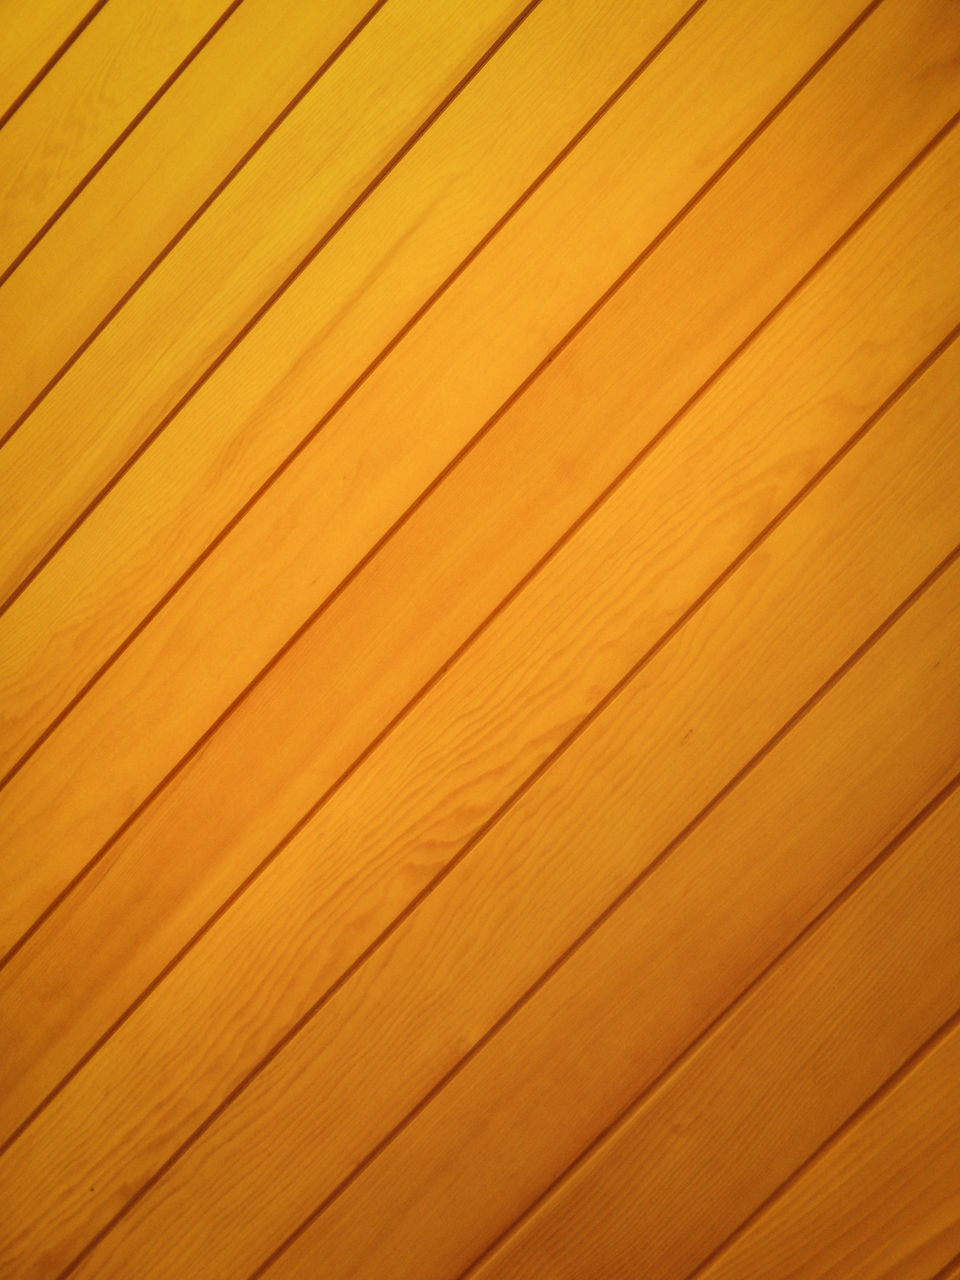 backgrounds, pattern, wood, full frame, textured, no people, yellow, flooring, floor, striped, hardwood floor, brown, wood grain, wood flooring, copy space, hardwood, close-up, plank, wood stain, architecture, laminate flooring, abstract, indoors, wood paneling, wall - building feature, built structure, material, in a row, nature, floorboard, repetition, plywood, parquet floor